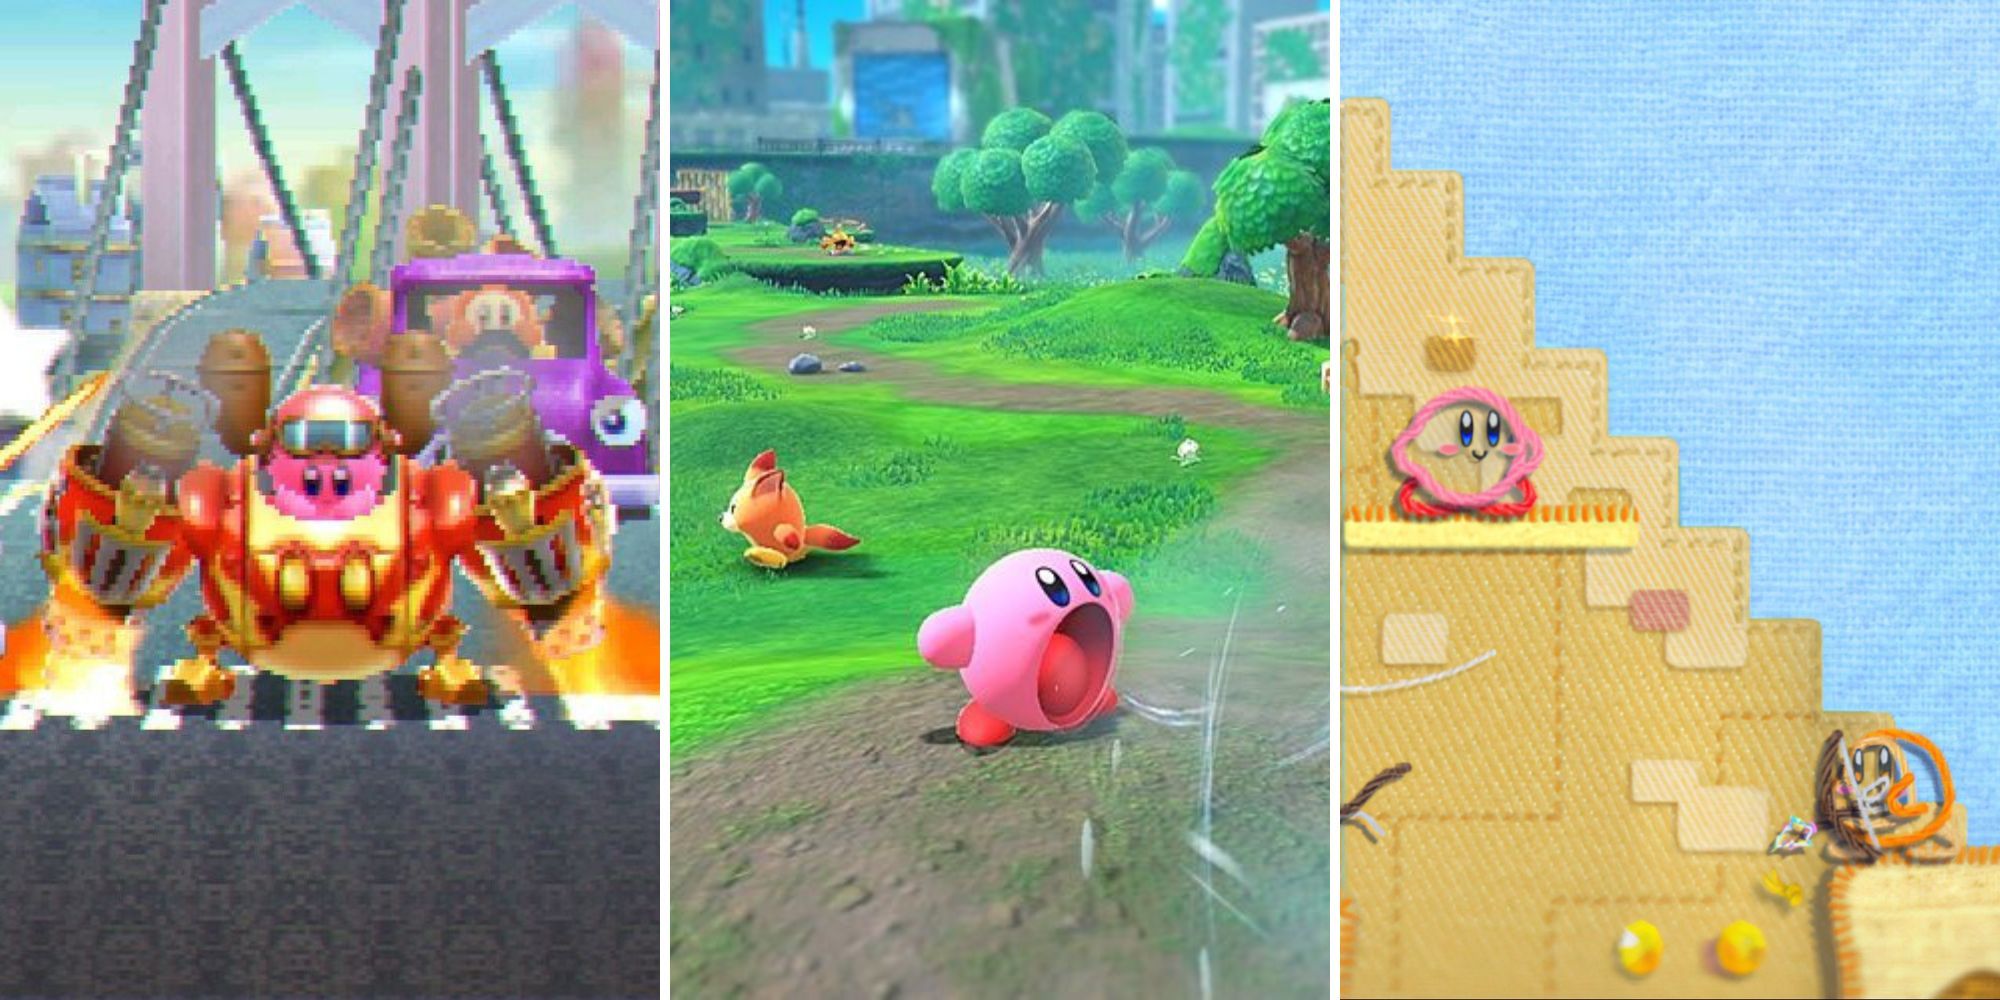 A grid of the Kirby games Kirby: Planet Robobot, Kirby and the Forgotten Land, and Kirby’s Epic Yarn